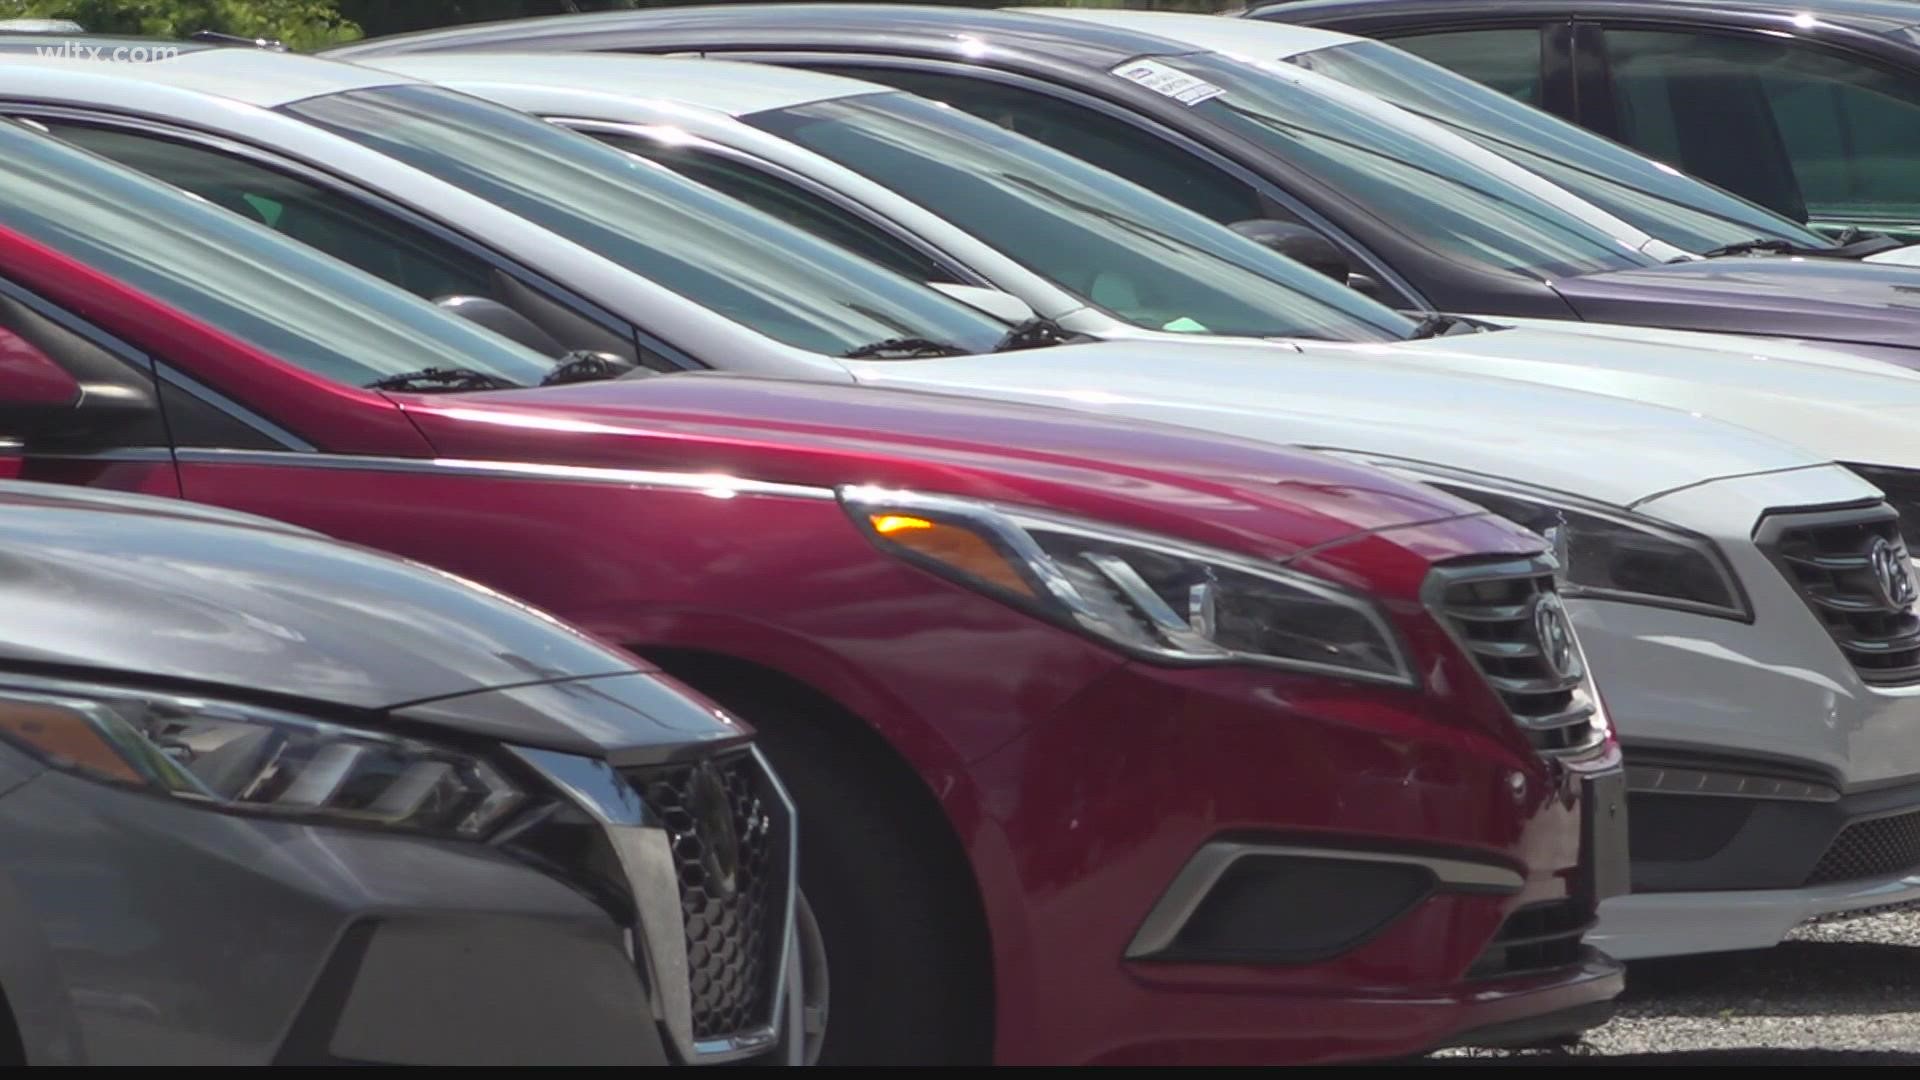 If you're looking to sell your car, it could be worth more now than a year ago.